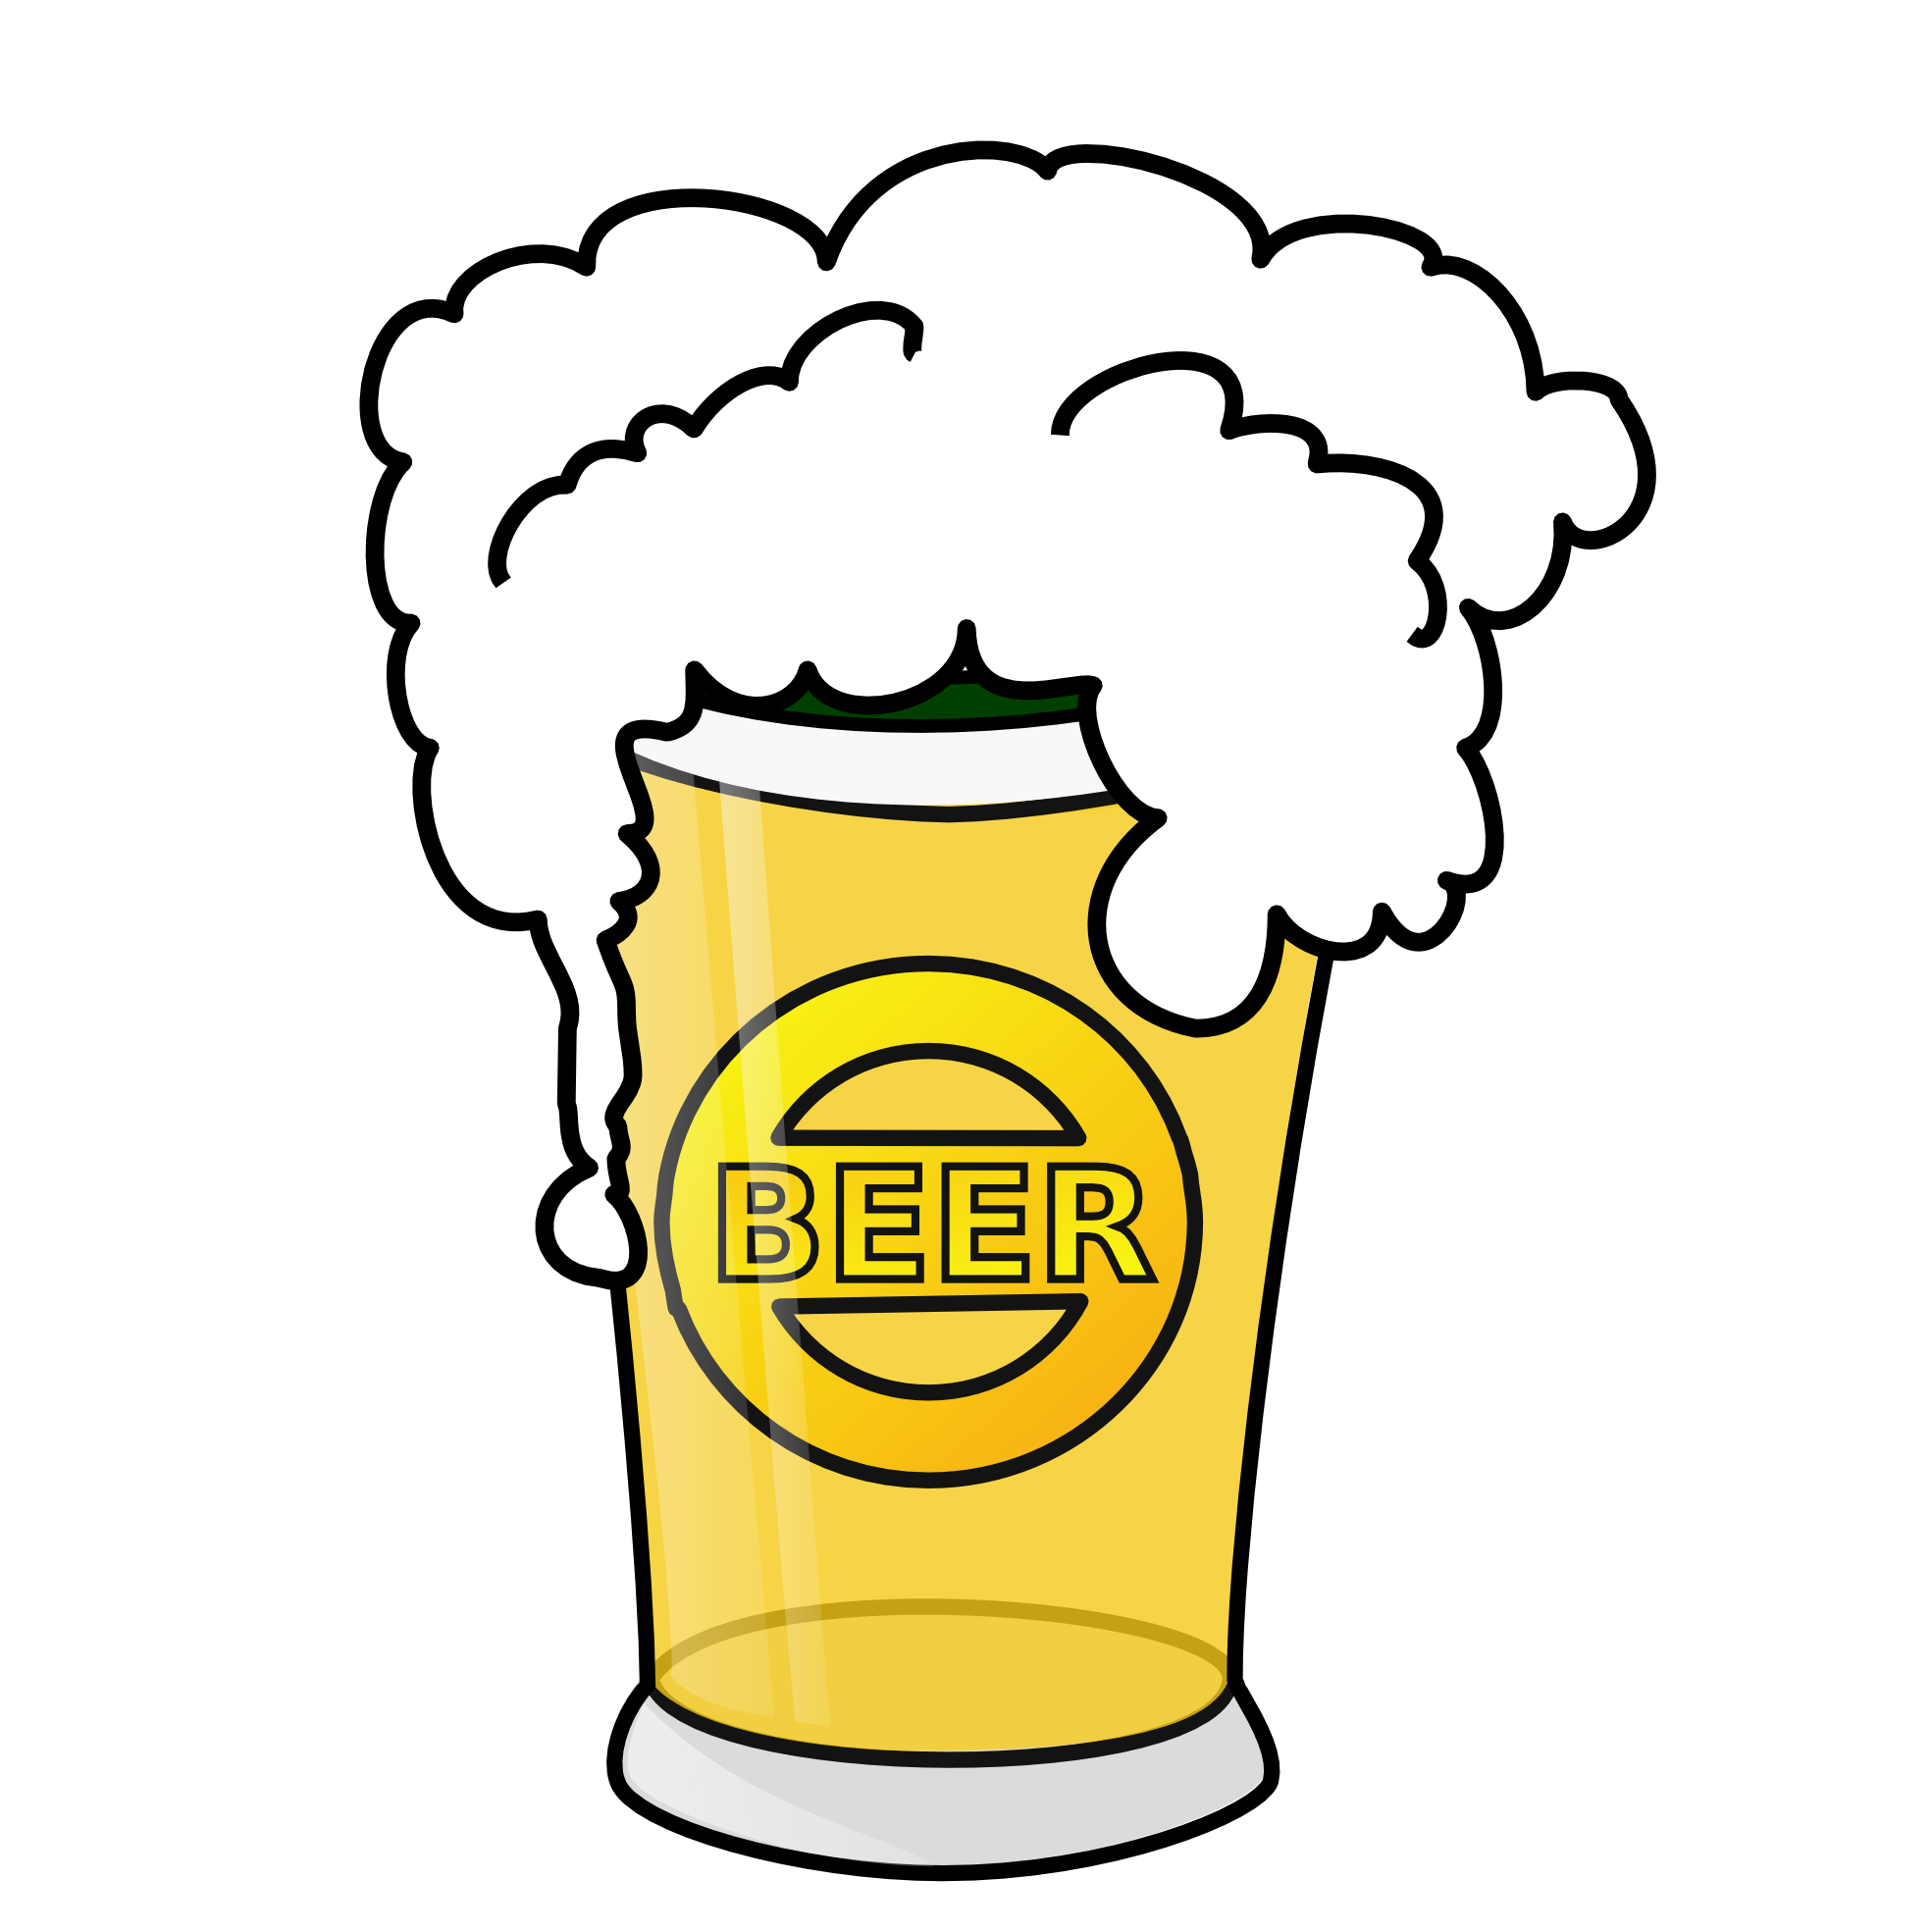 Beer 20clip 20art | Clipart Panda - Free Clipart Images